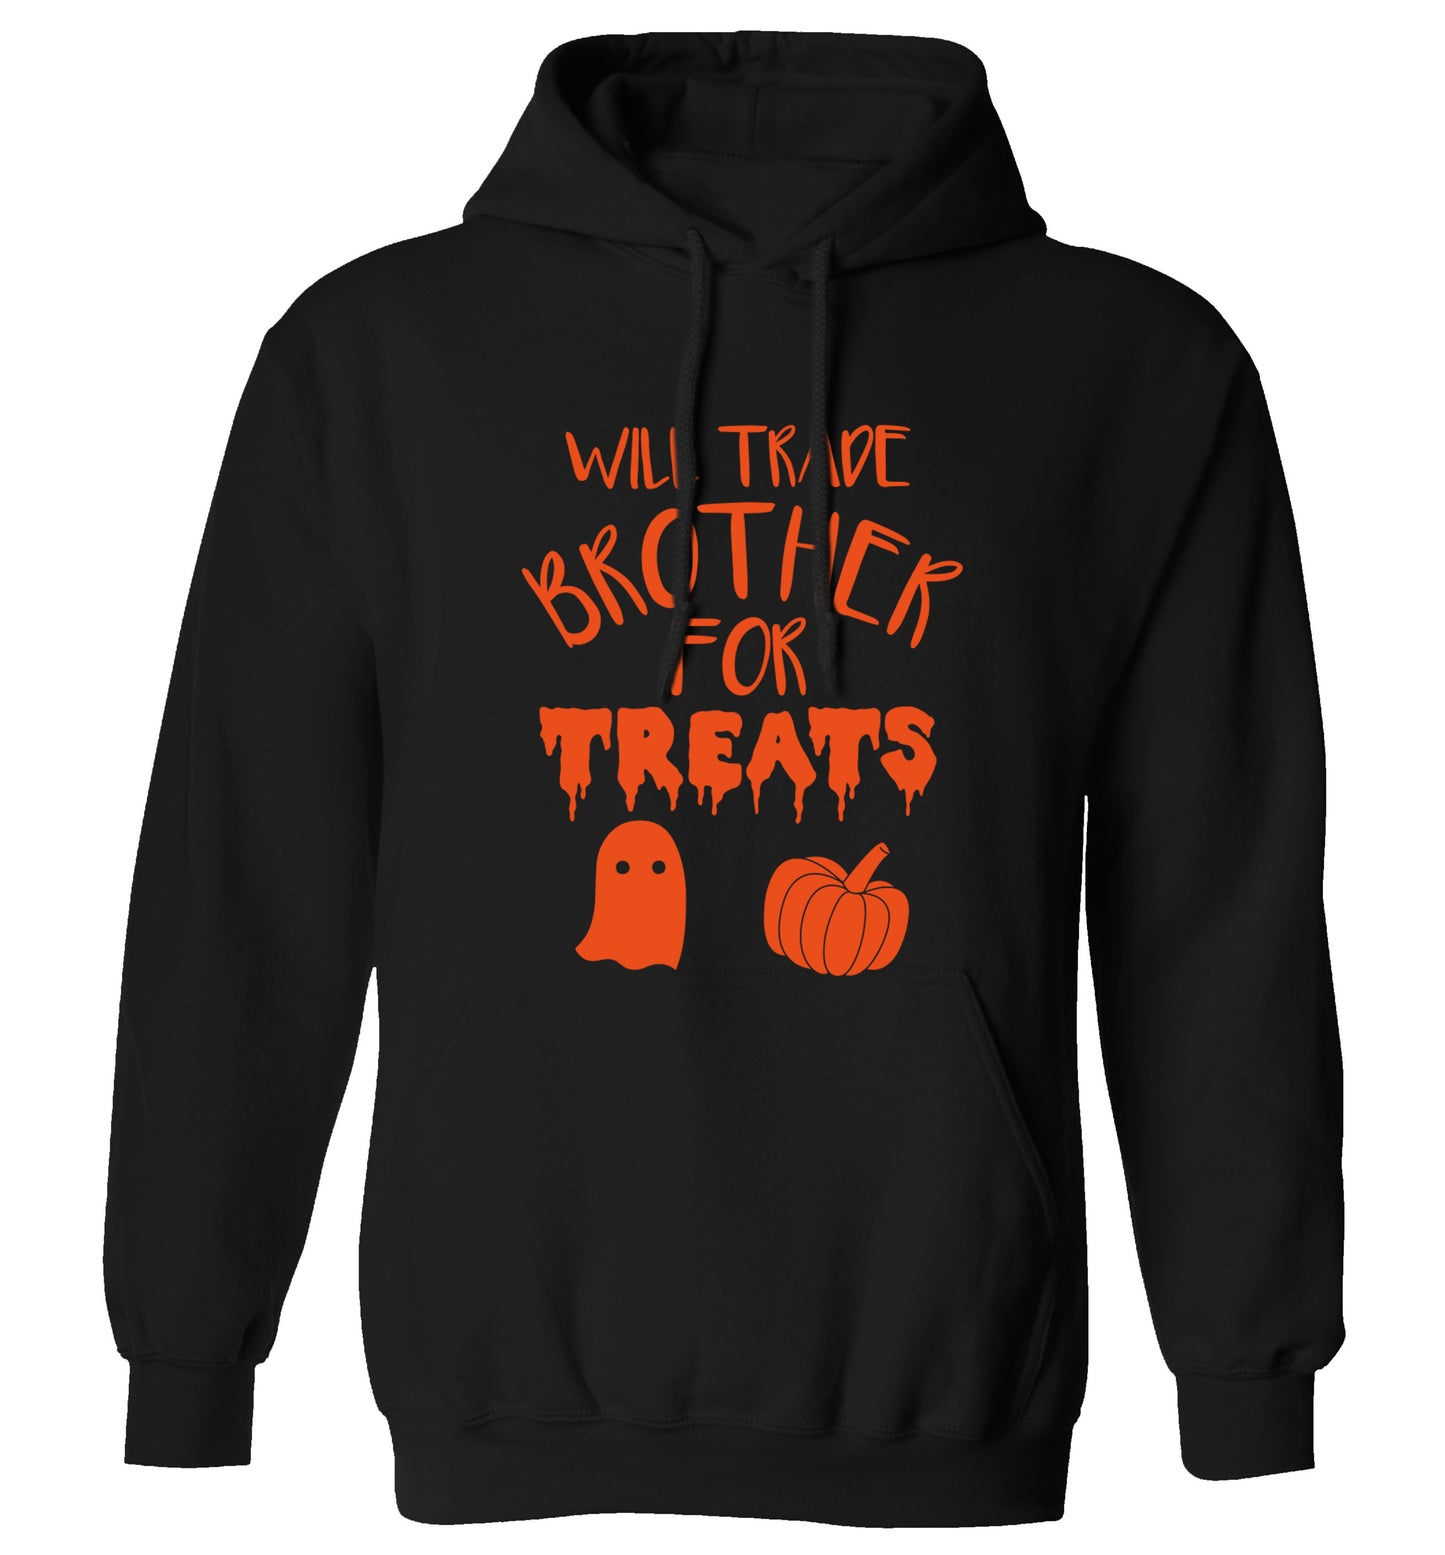 Will trade brother for treats adults unisex black hoodie 2XL